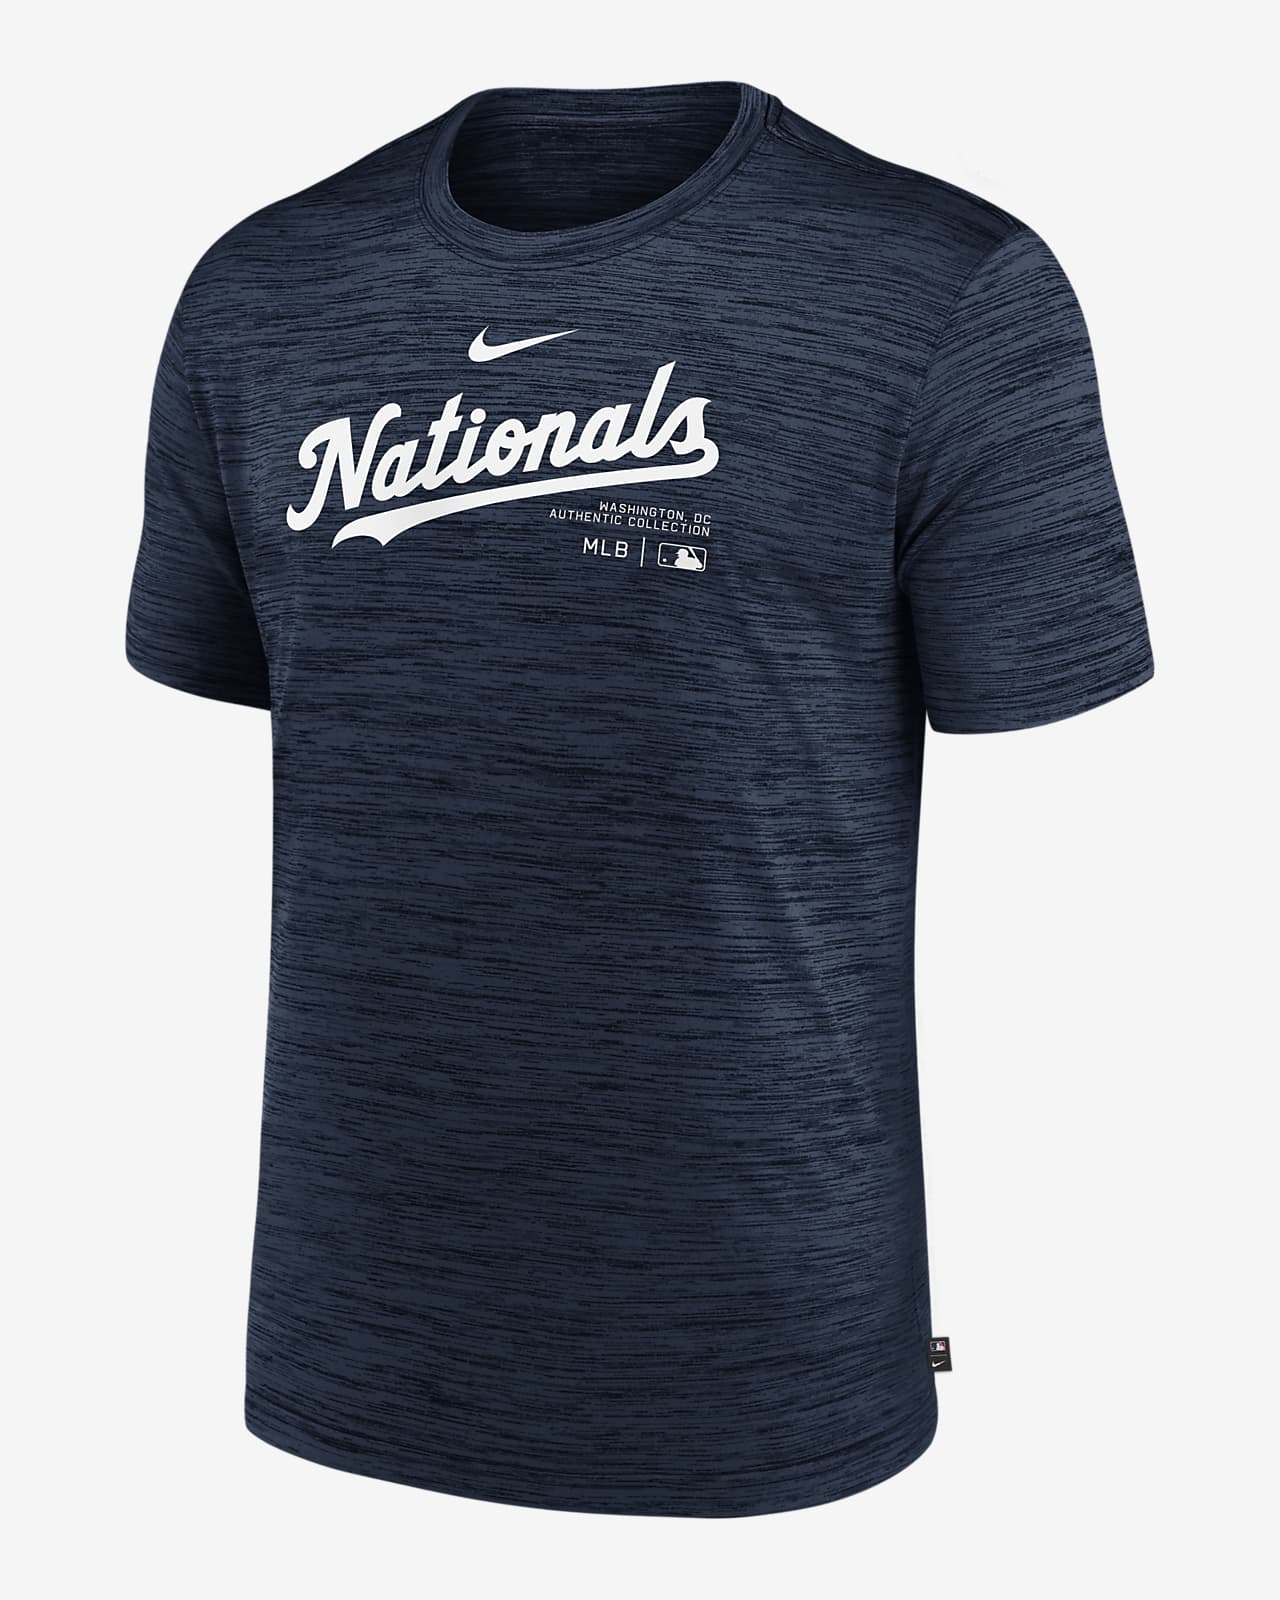 Washington Nationals Authentic Collection Practice Velocity Men's Nike Dri-FIT MLB T-Shirt